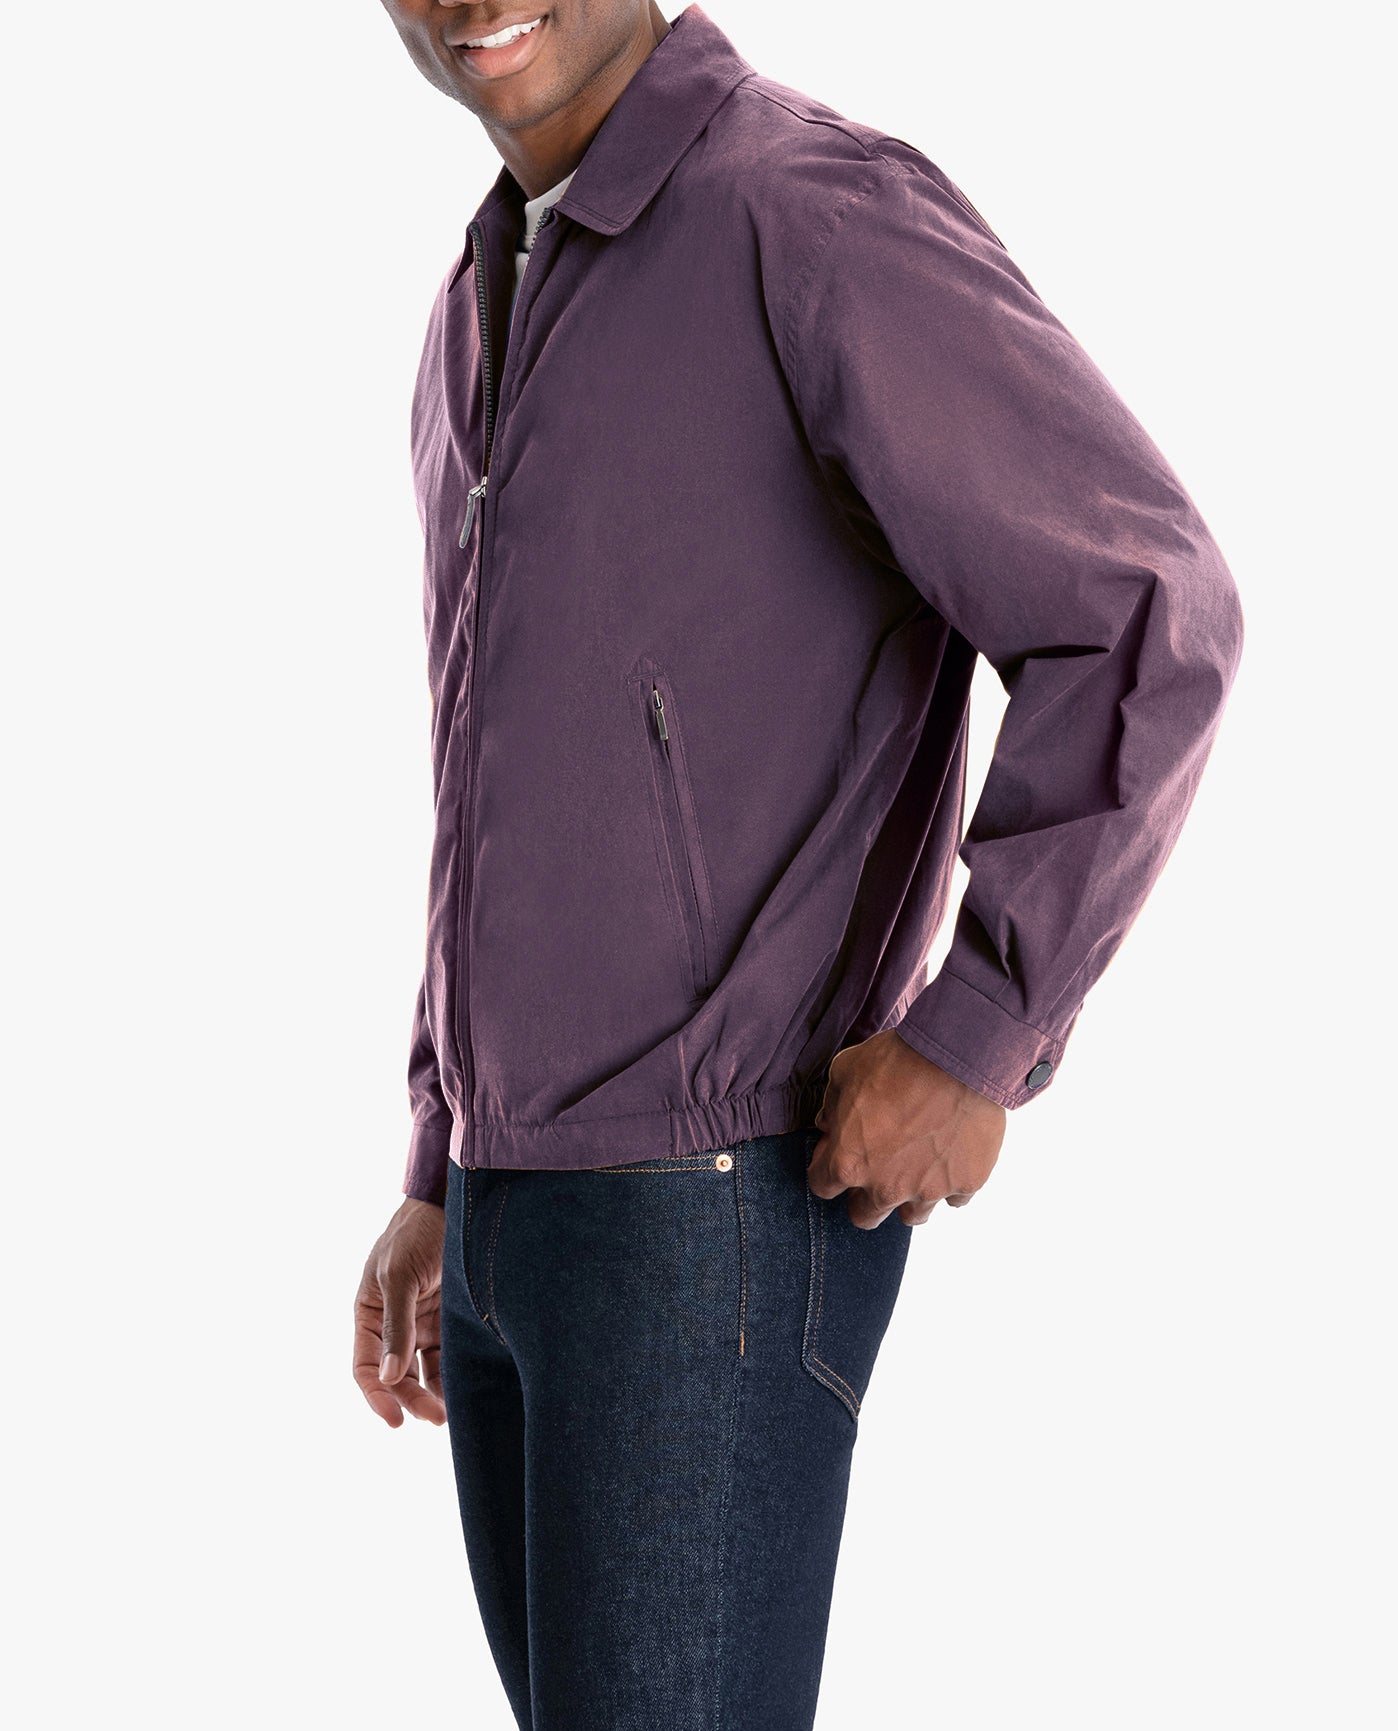 SIDE VIEW OF LIGHT WEIGHT ZIP FRONT GOLF JACKET | MAROON